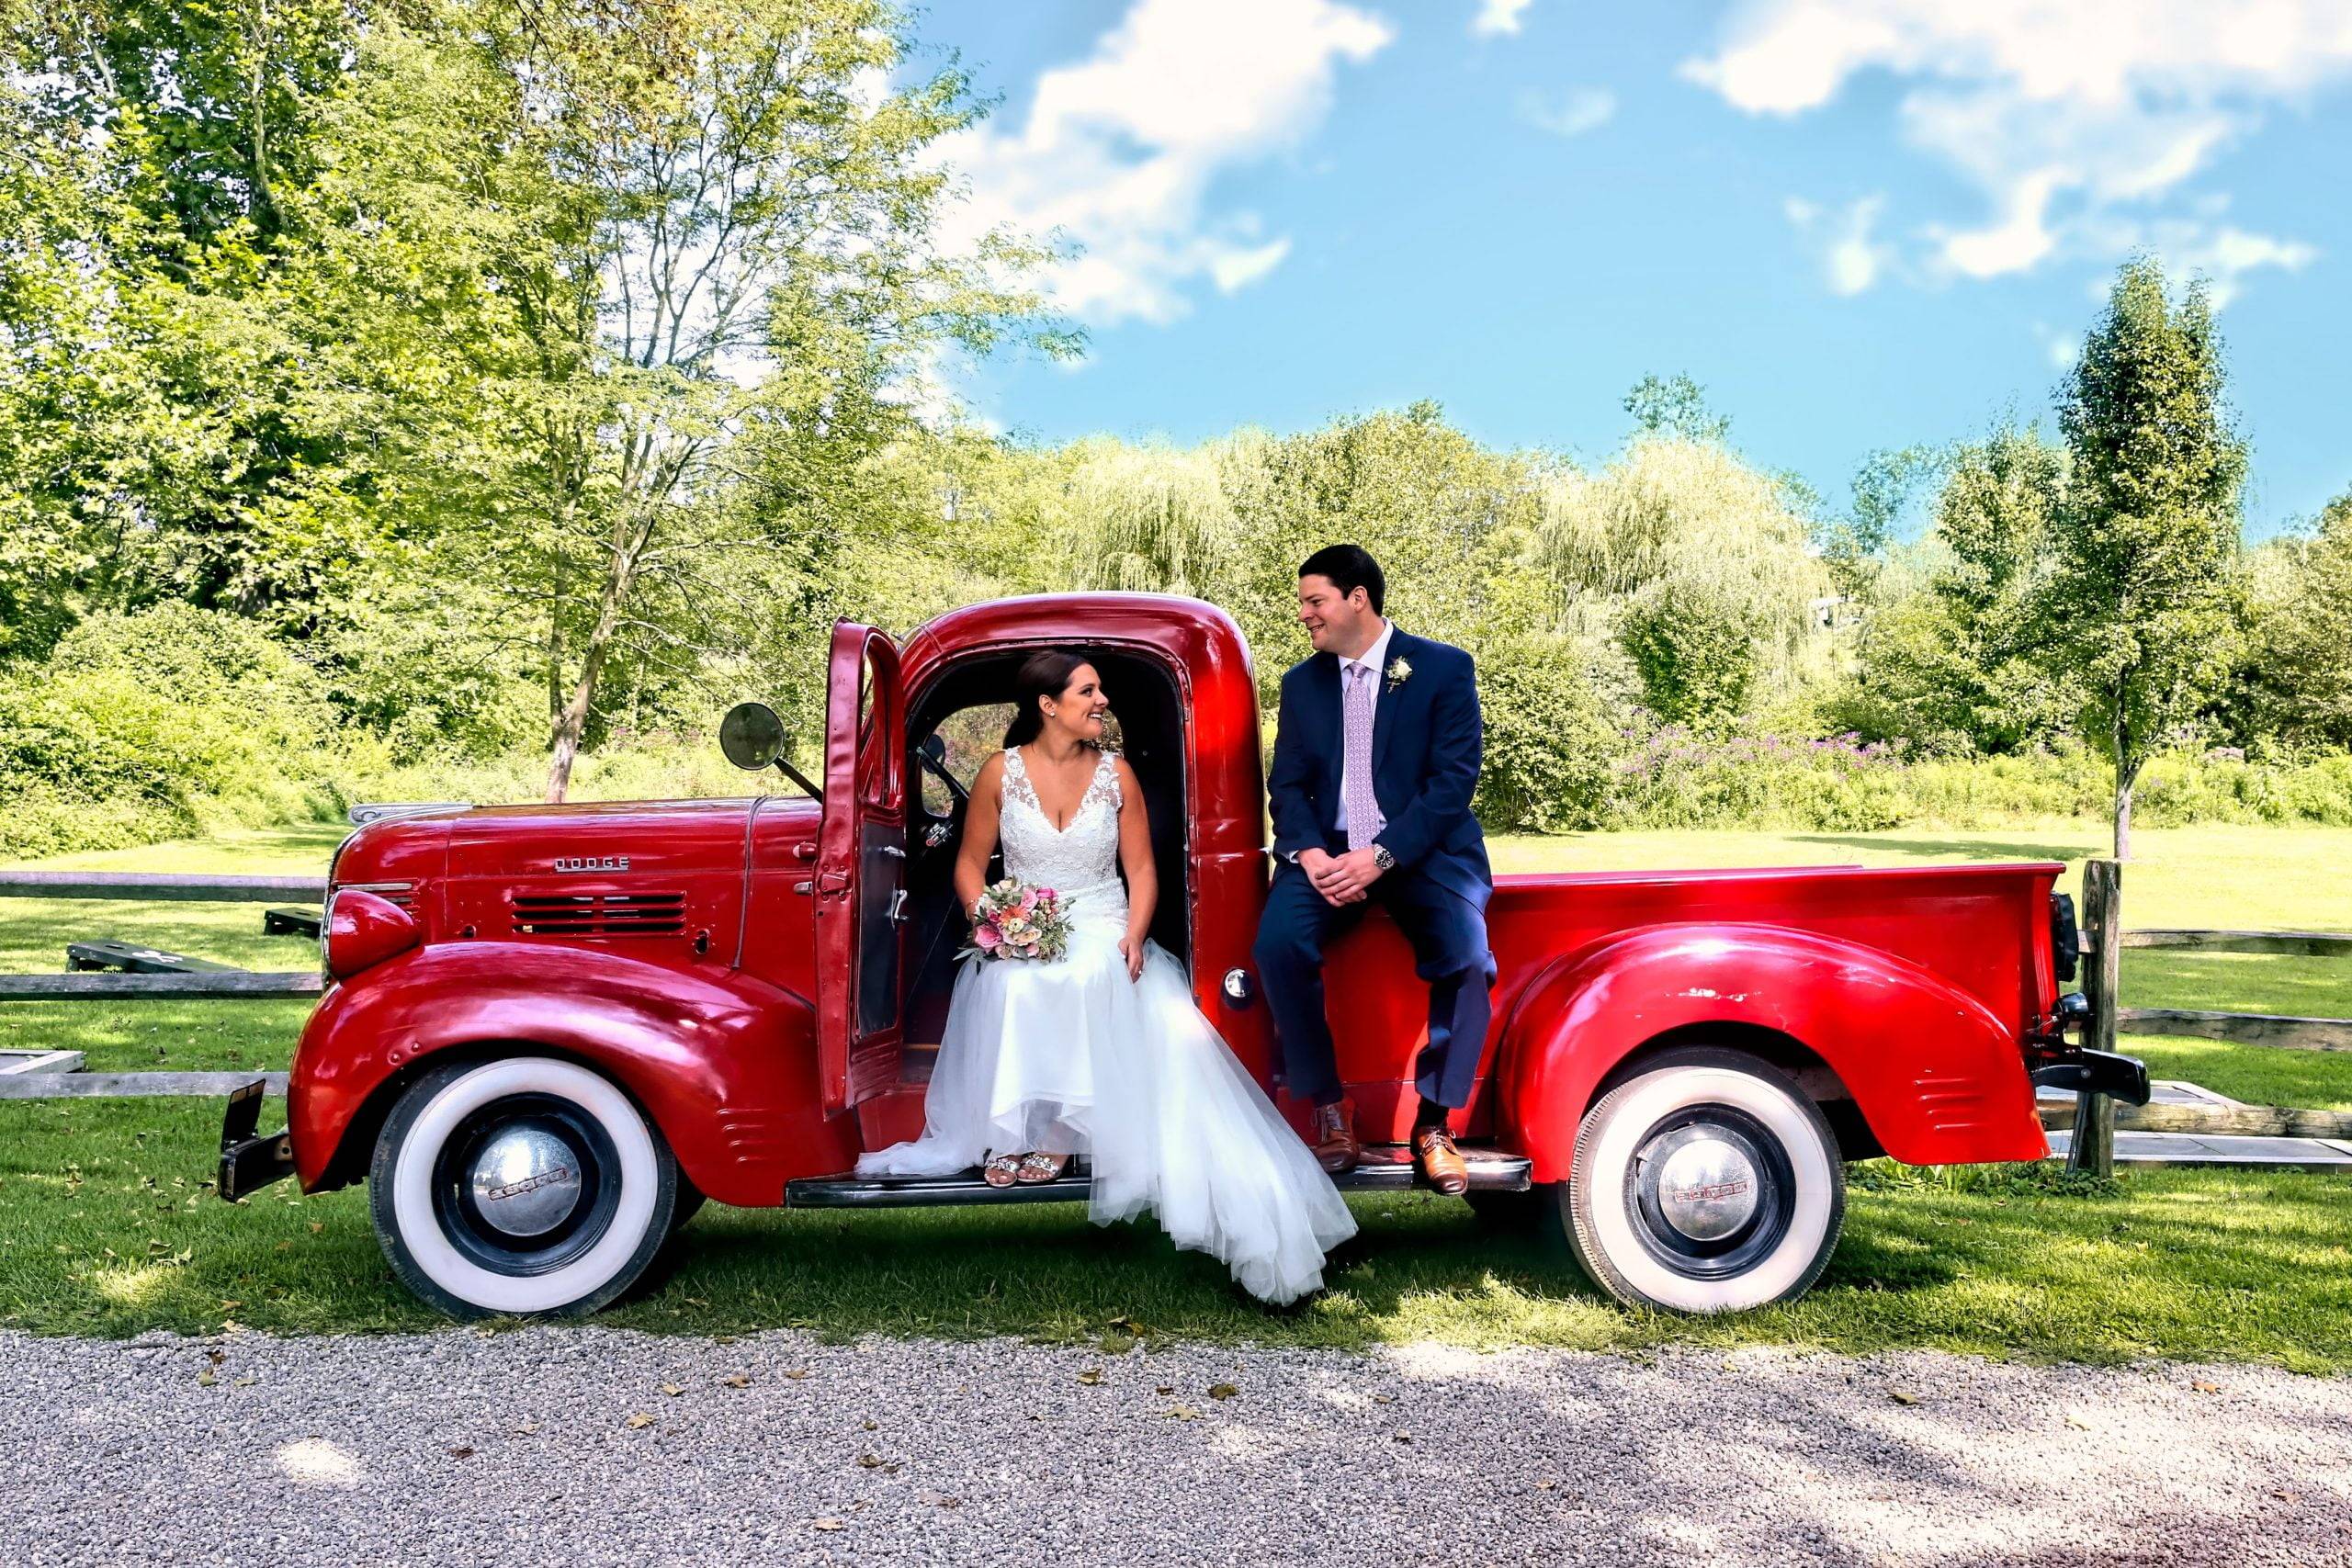 A bride and groom sitting in the back of a red truck.